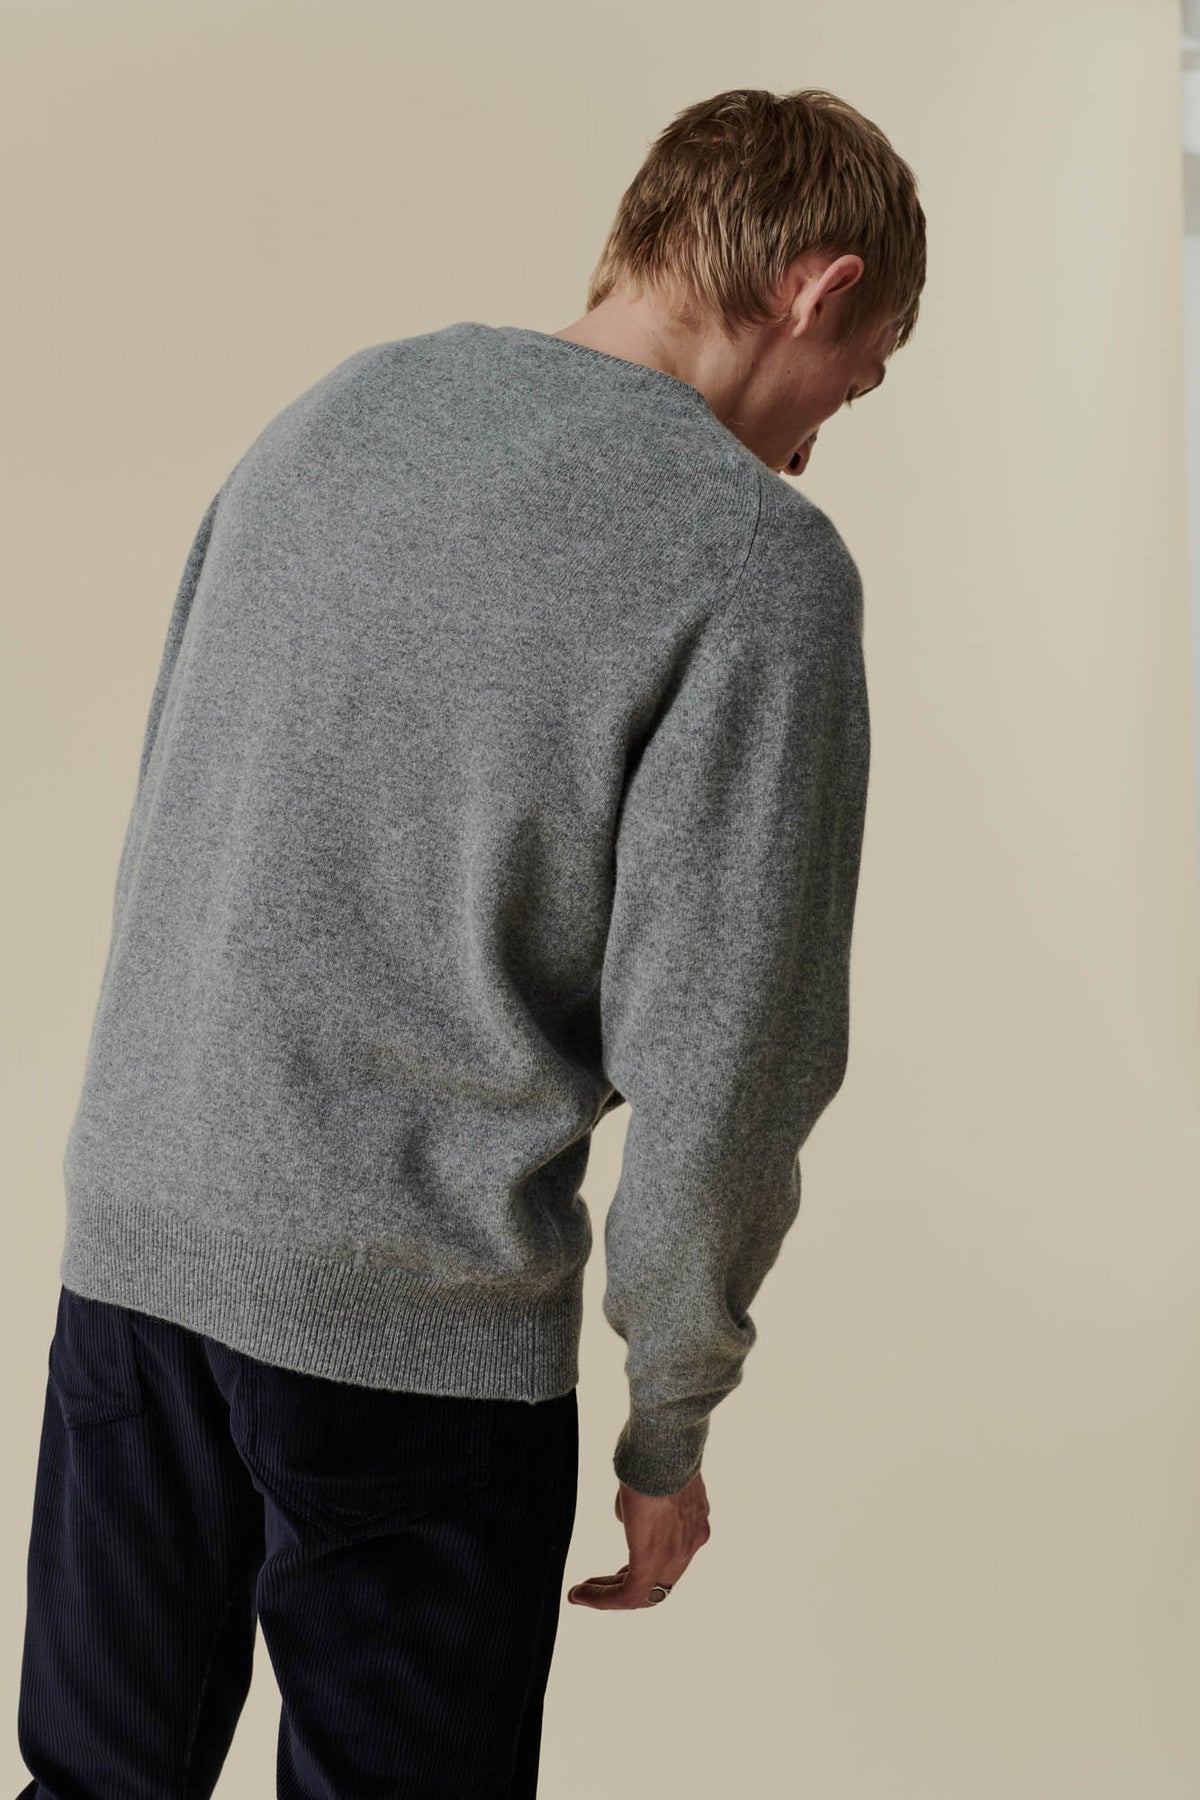 
            Back of white male wearing grey lambswool crew neck